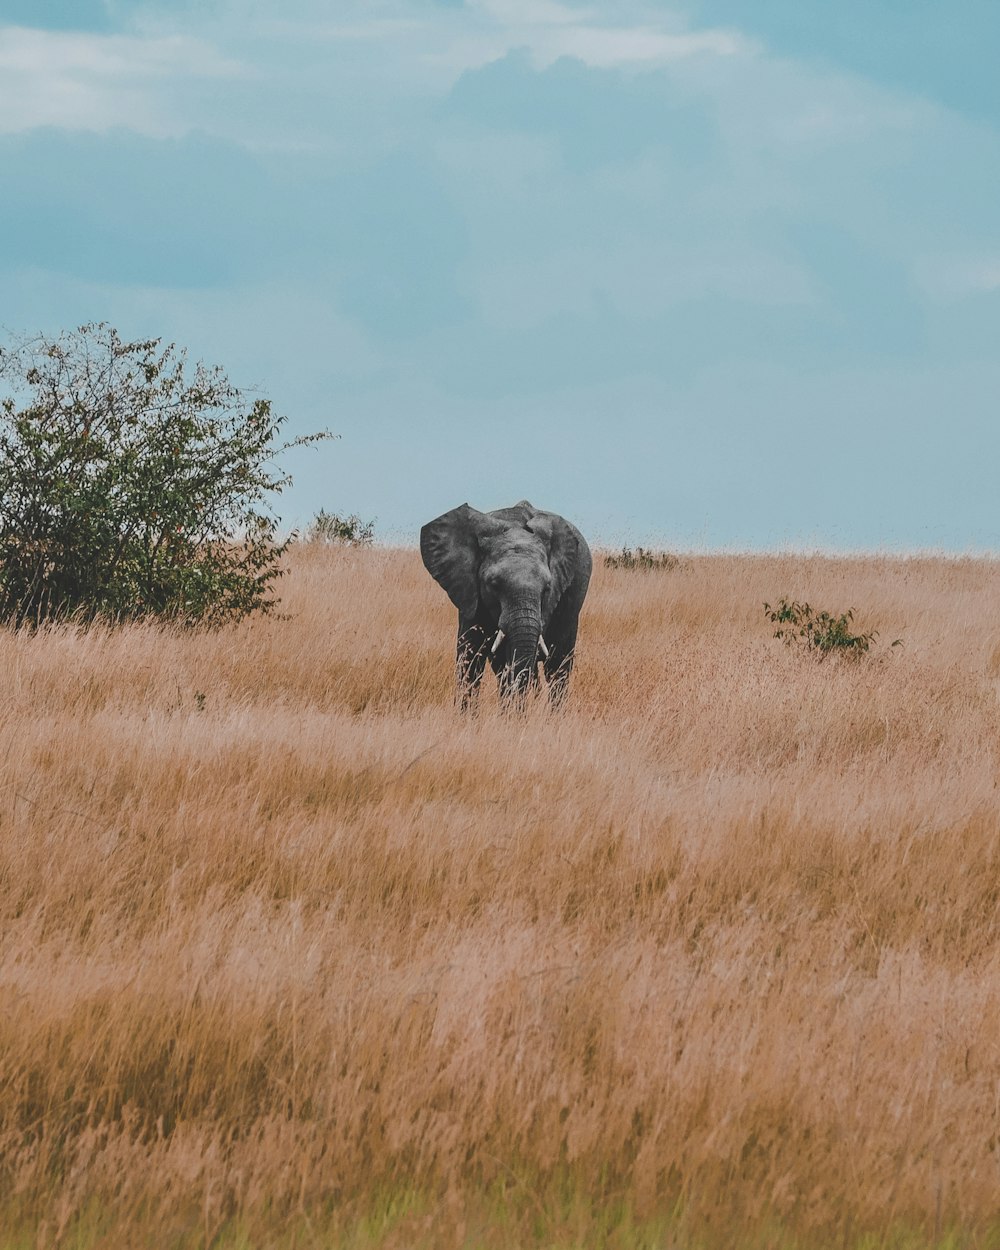 gray elephant standing in withered grass field